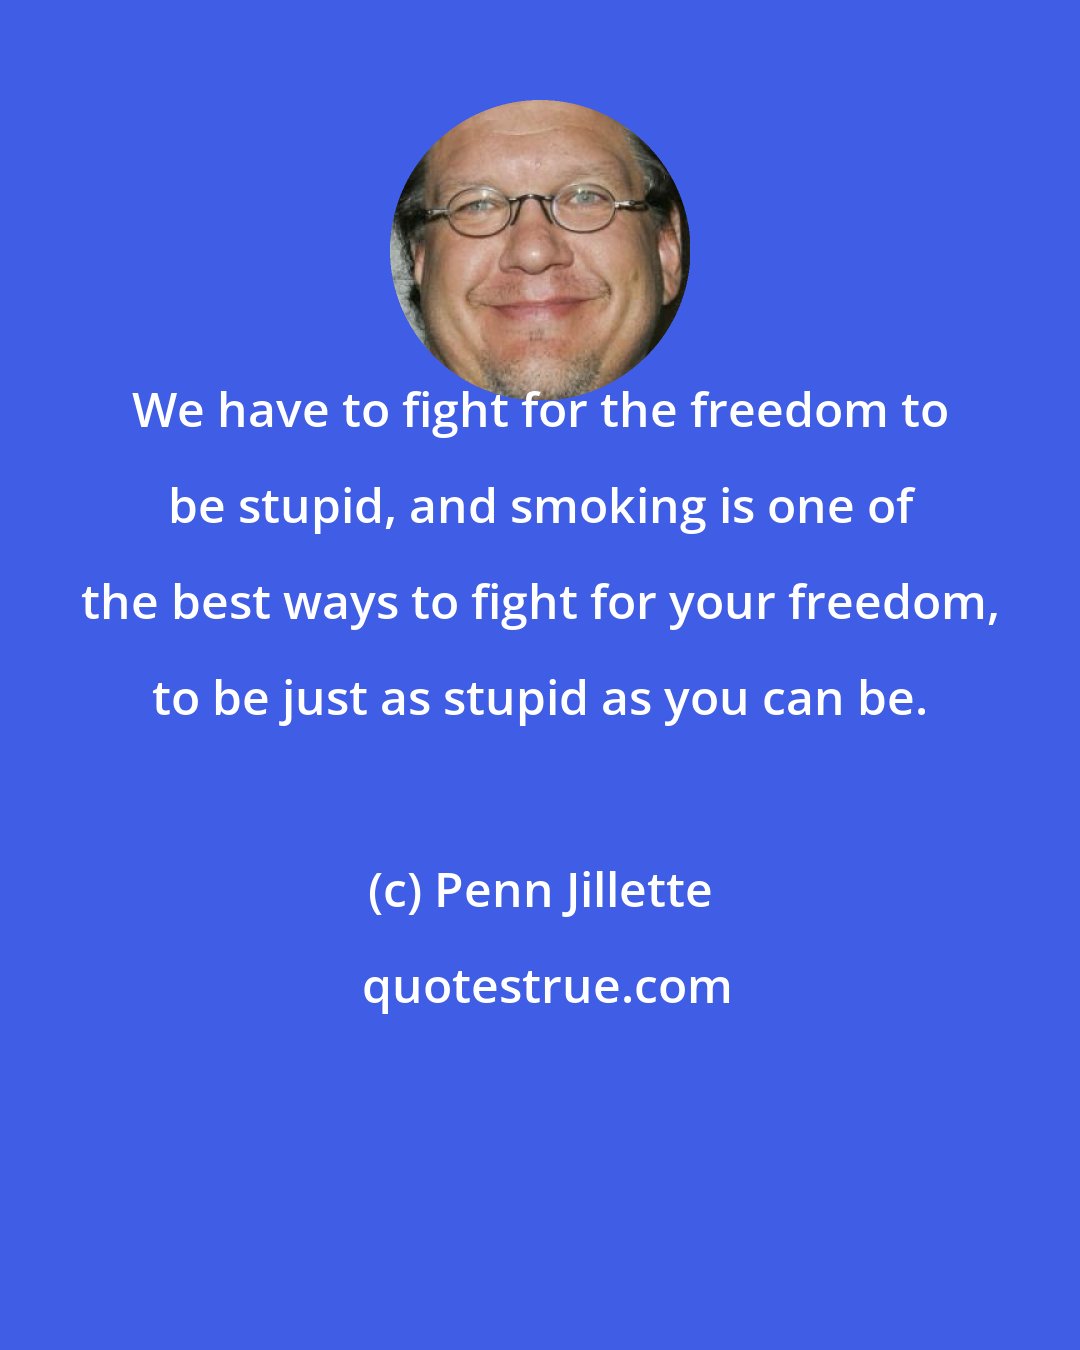 Penn Jillette: We have to fight for the freedom to be stupid, and smoking is one of the best ways to fight for your freedom, to be just as stupid as you can be.